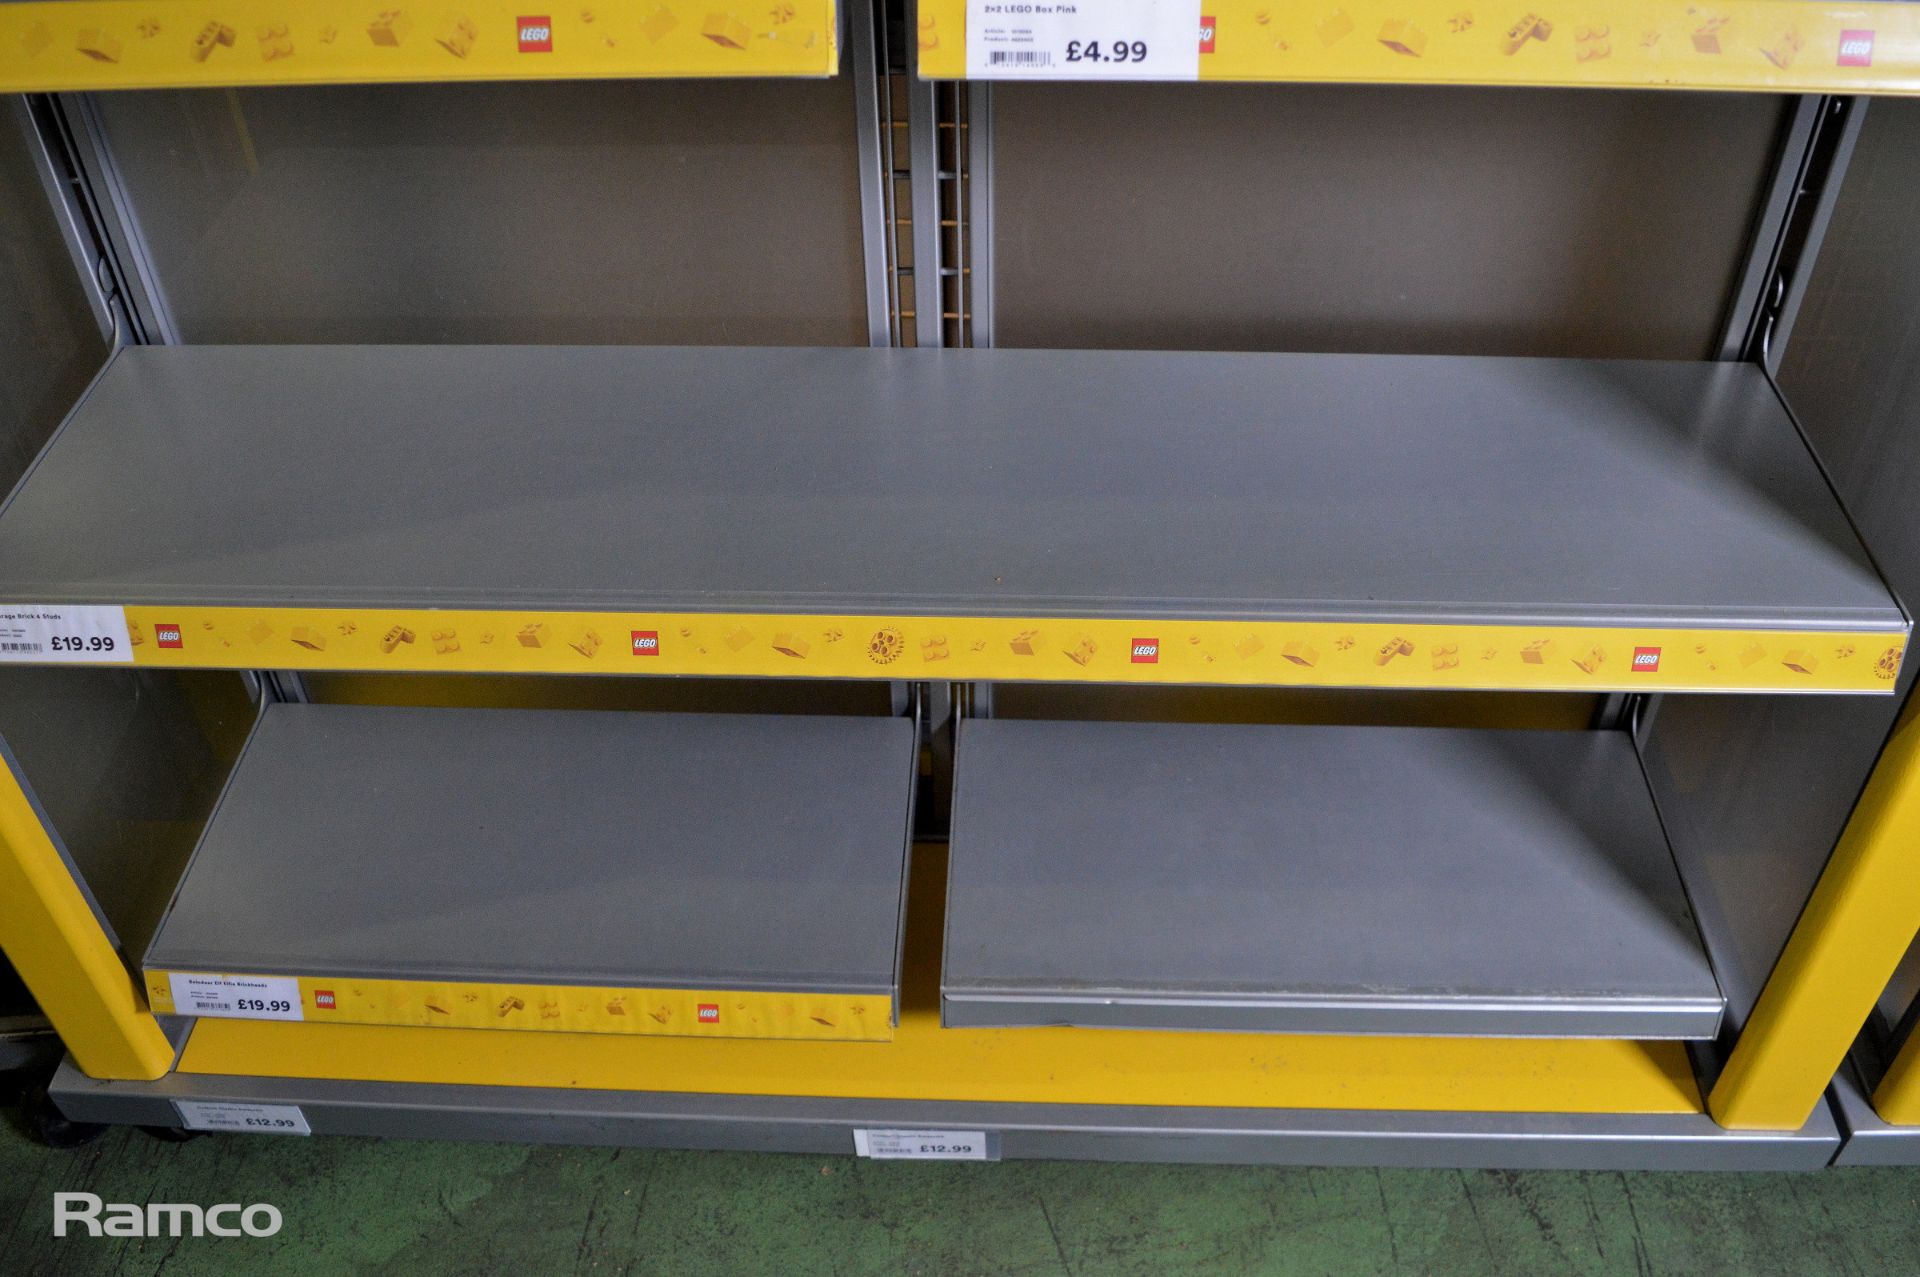 Double sided shelving shop display unit - L 1400mm x D 680mm x H 1540mm - Image 3 of 4